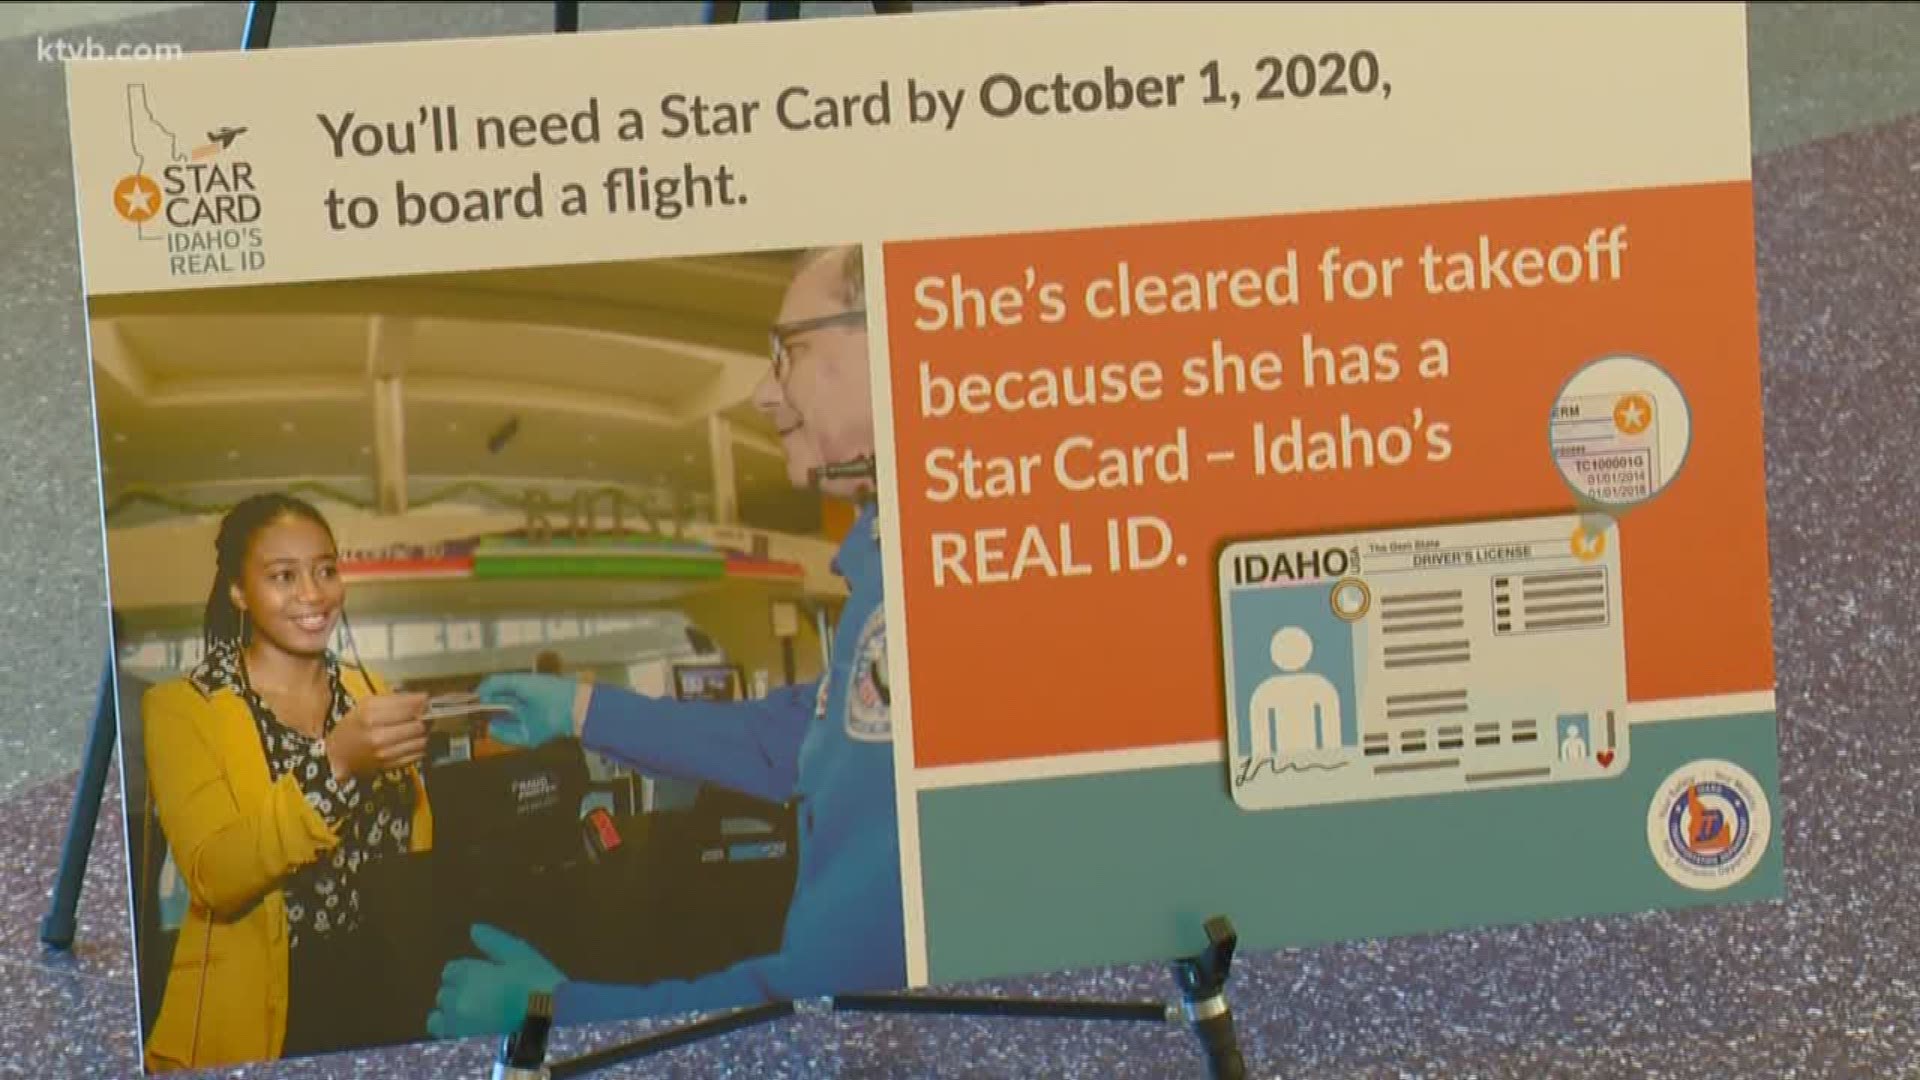 Officials say there are advantages to getting a Star Card.